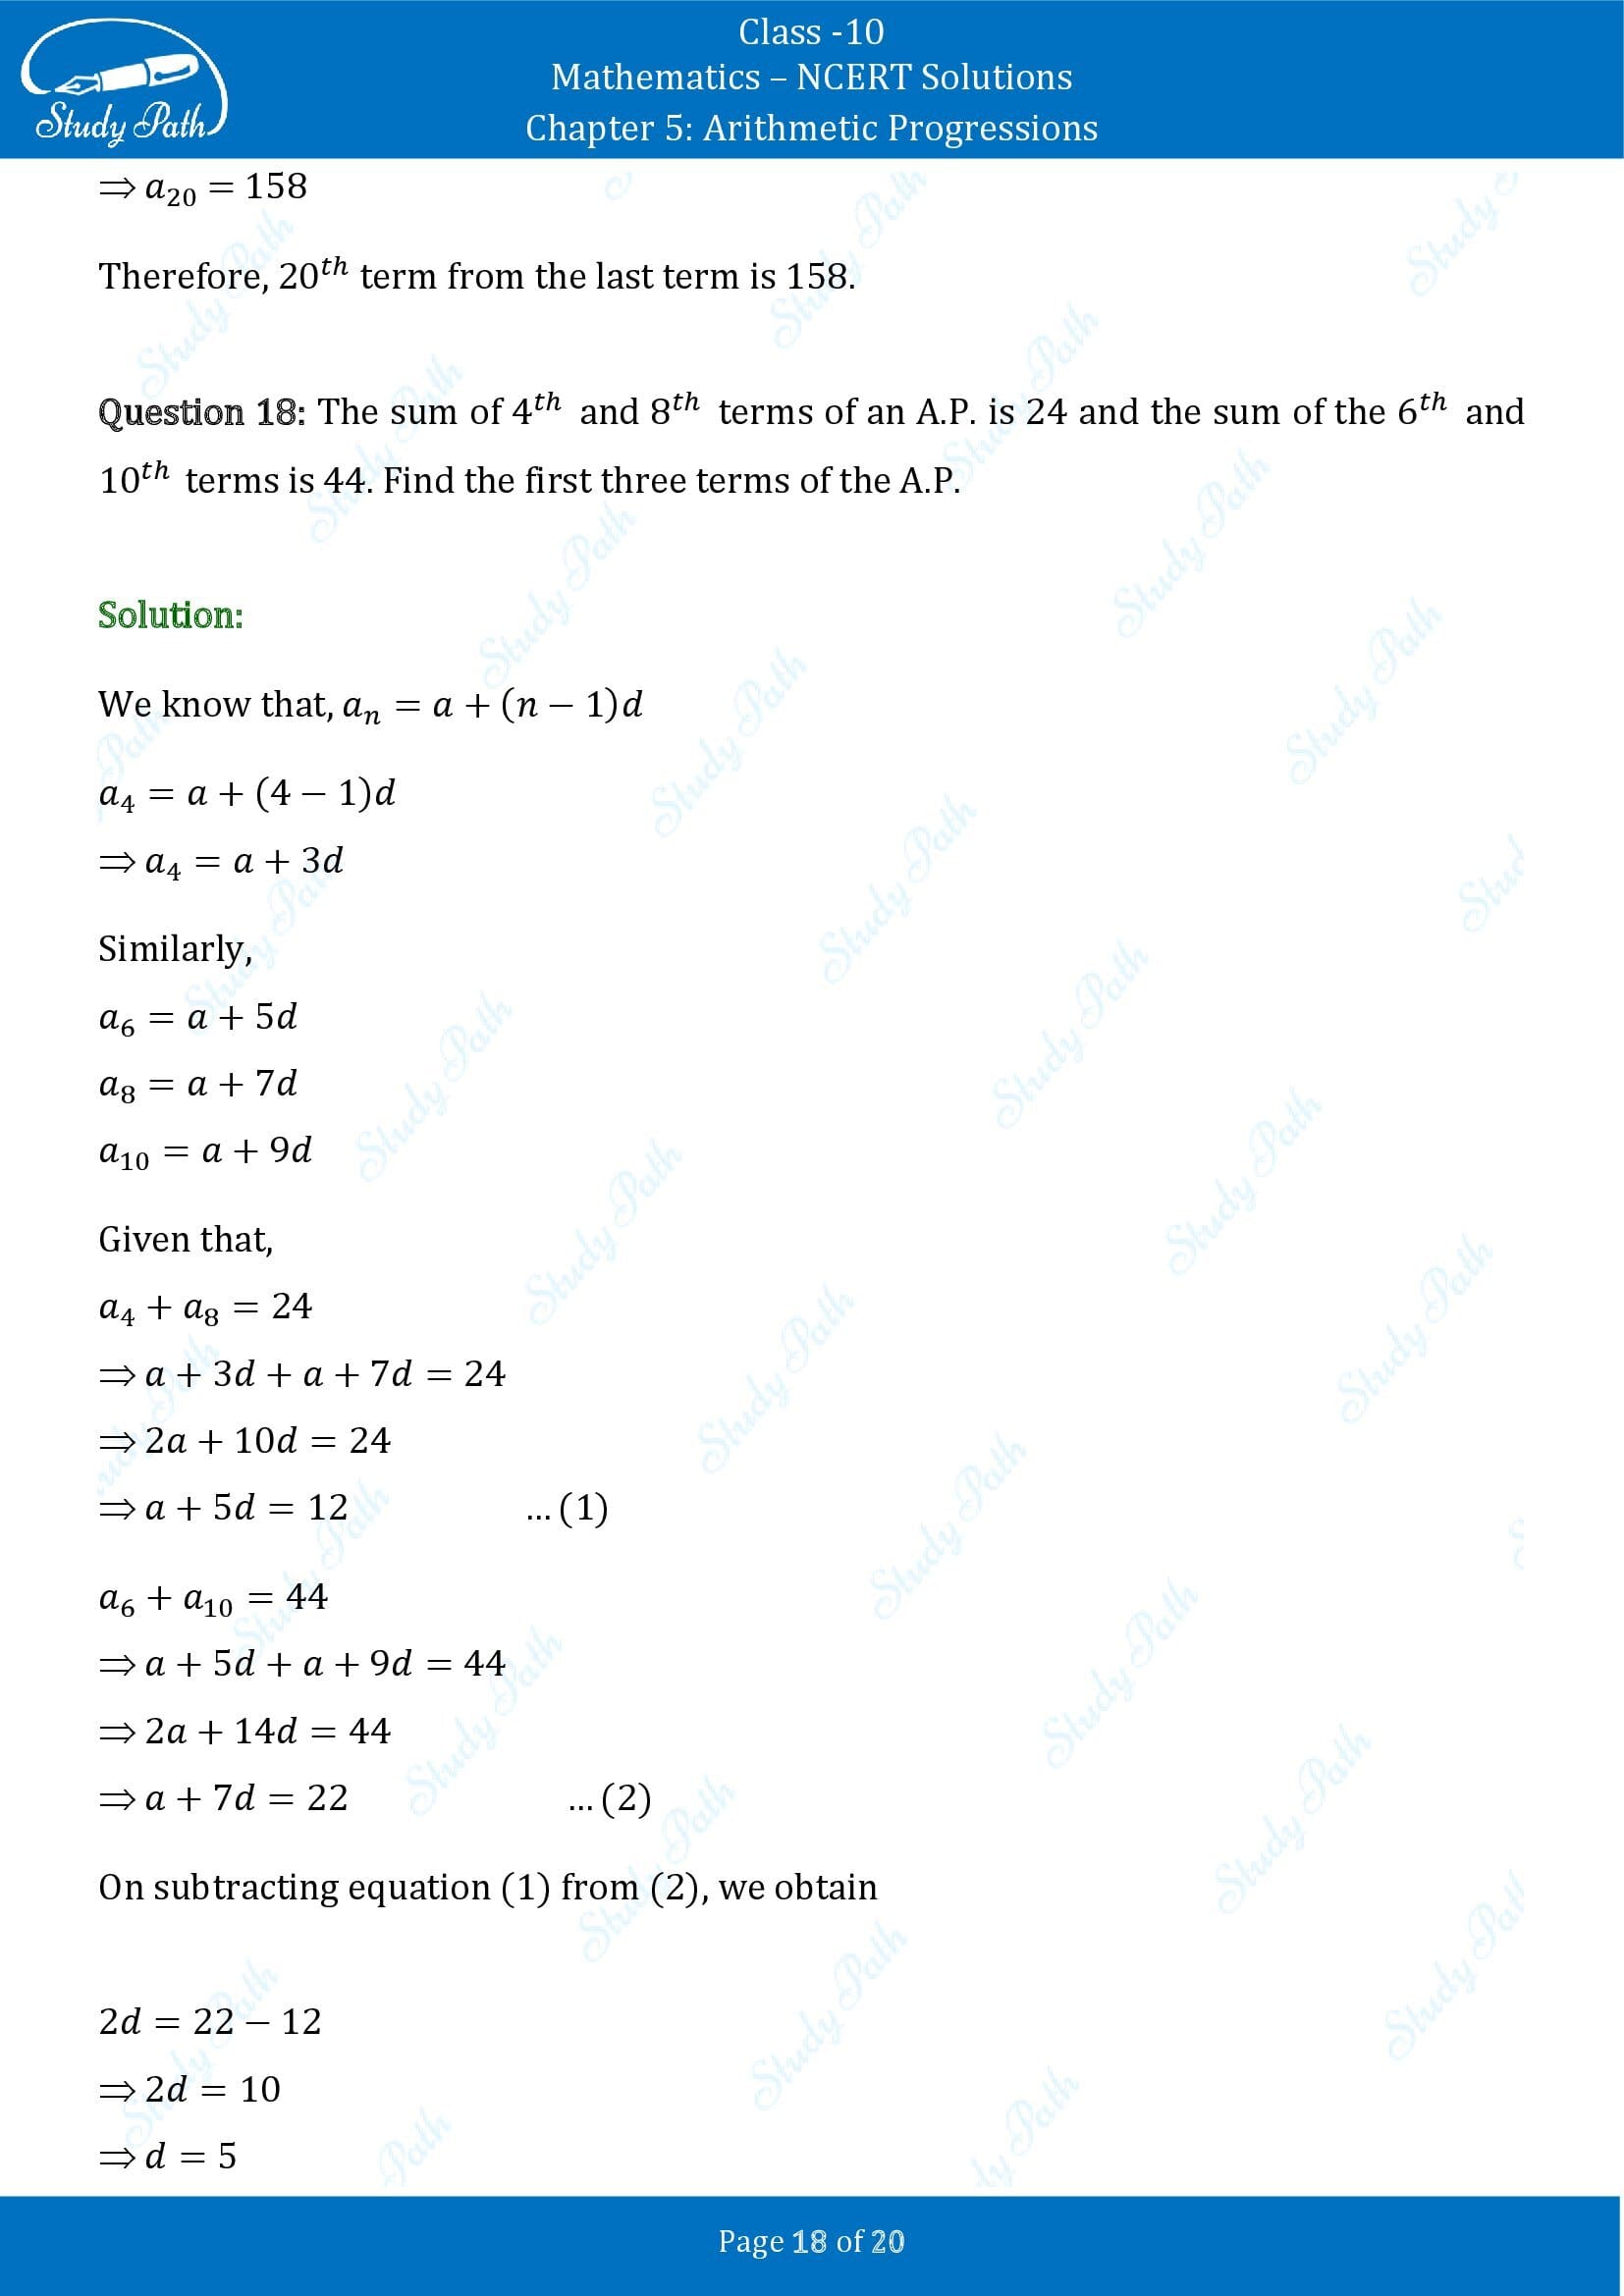 NCERT Solutions for Class 10 Maths Chapter 5 Arithmetic Progressions Exercise 5.2 00018